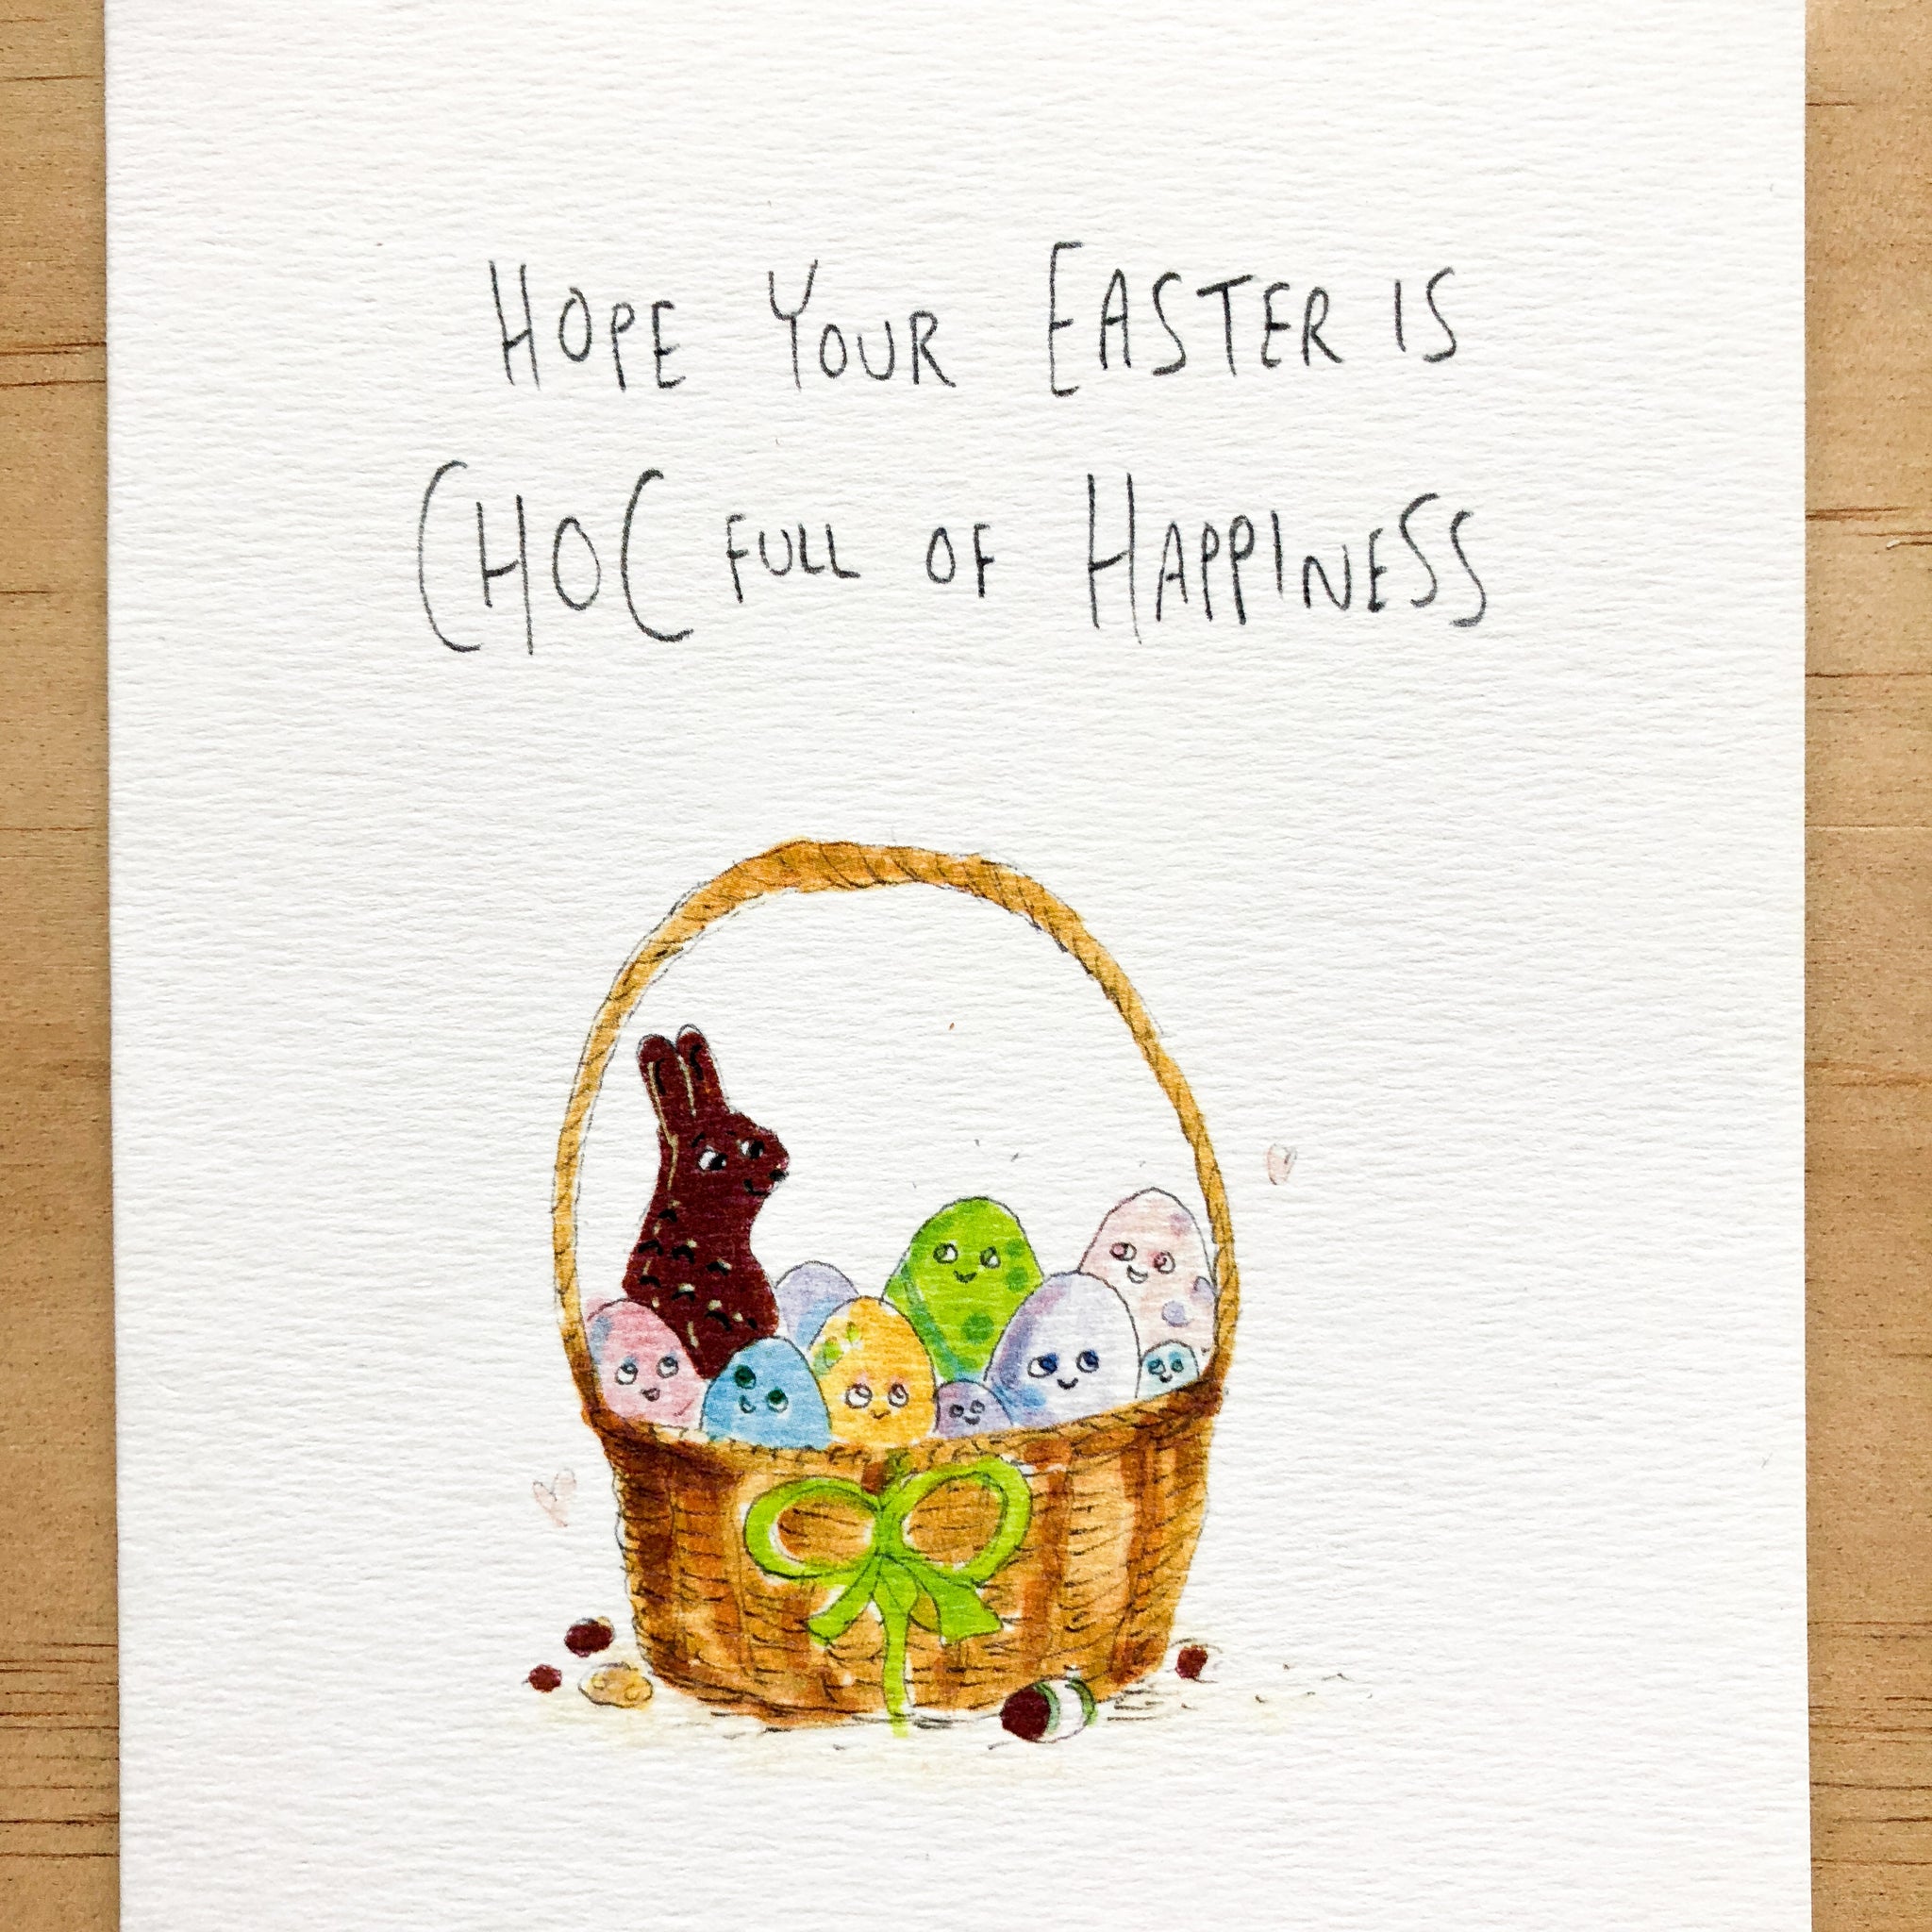 Hope Your Easter Is Choc Full of Happiness - Well Drawn